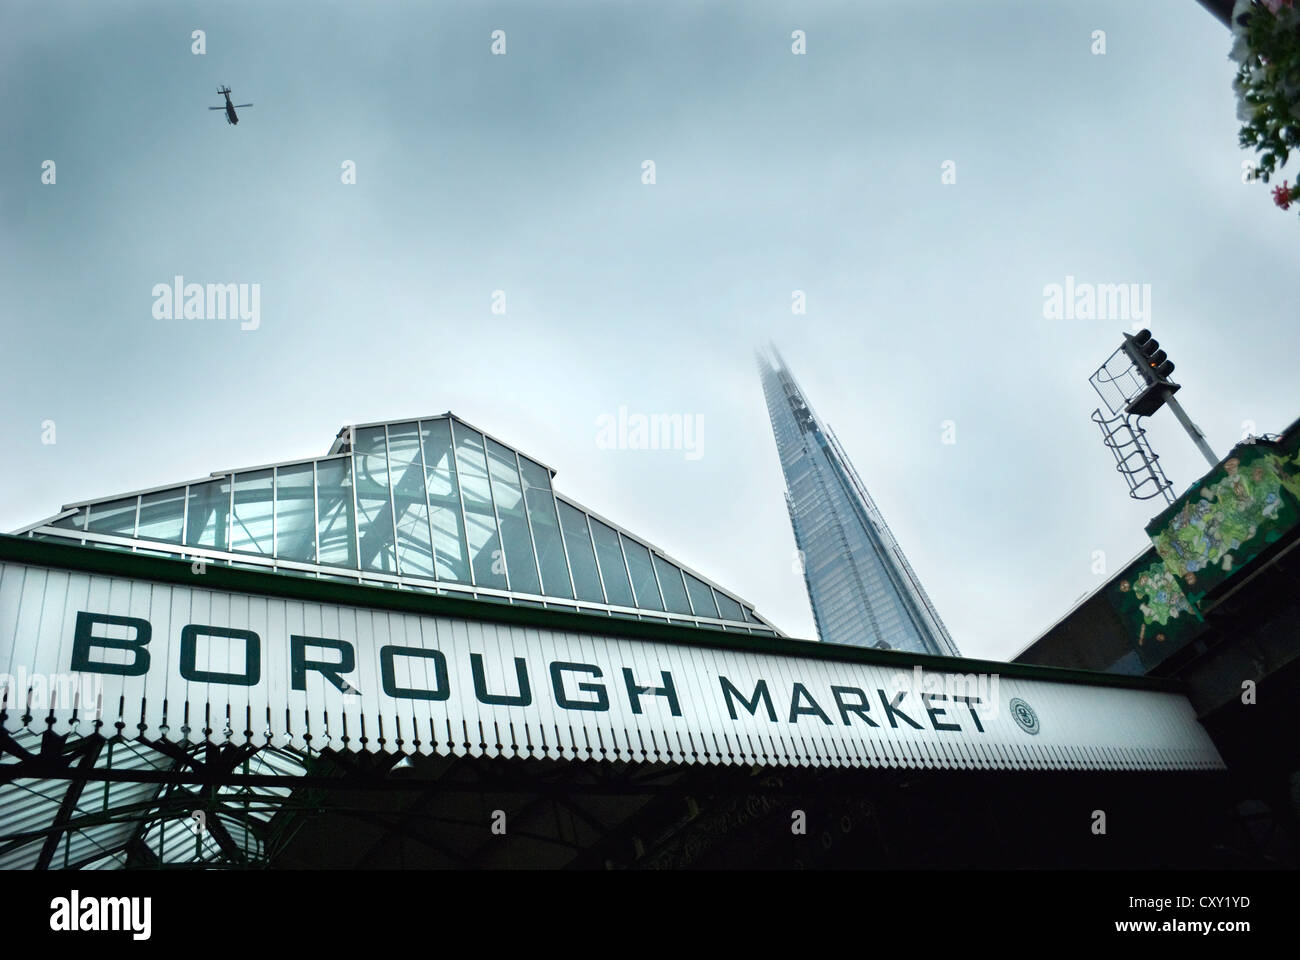 Borough Market and the Shard skyscraper, London with helicopter flying over head and a moody, grey sky. Stock Photo